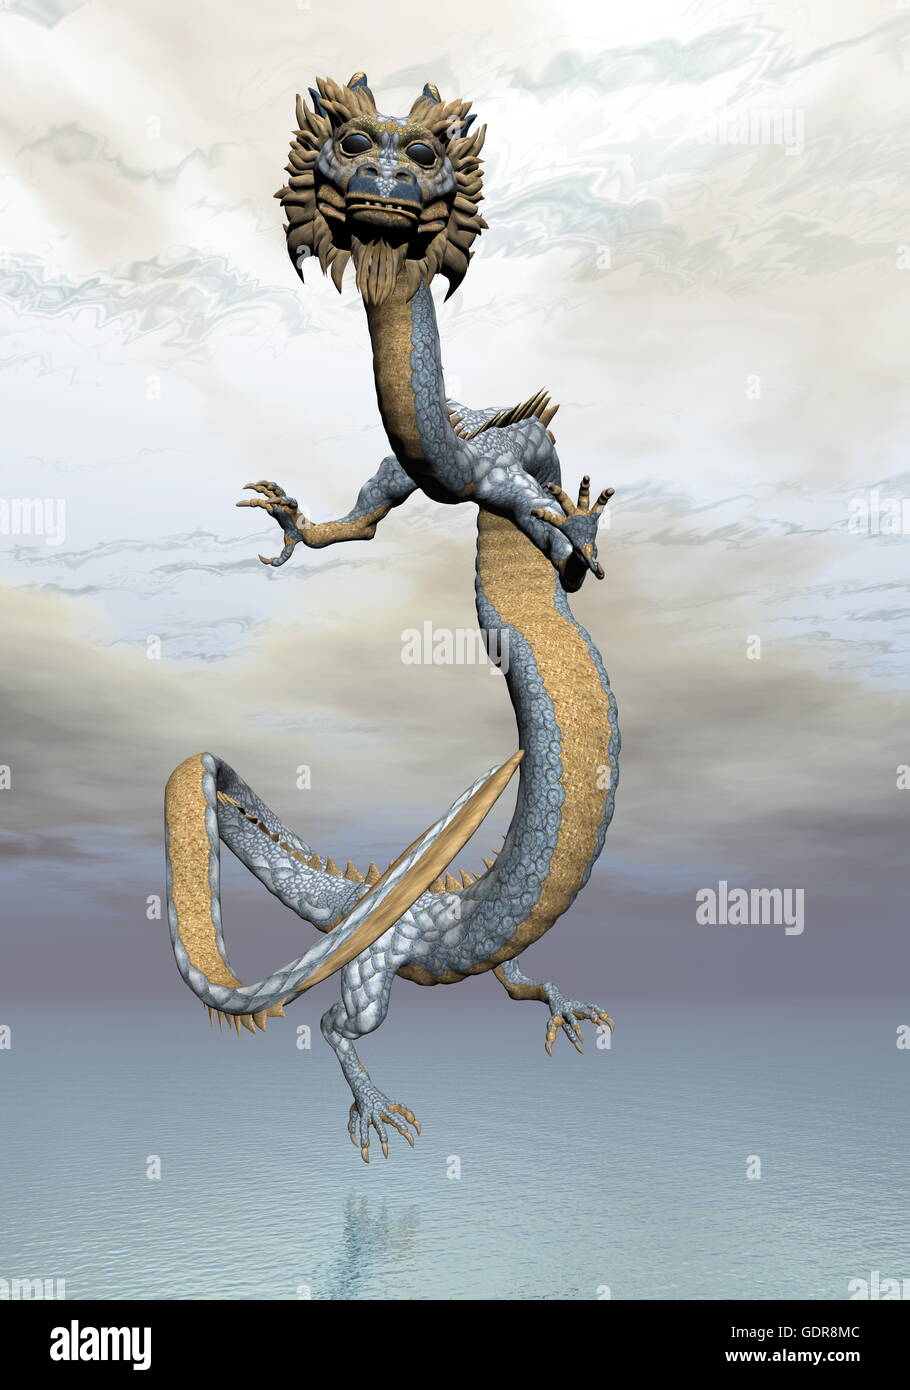 Eastern dragon in the sky - 3D render Stock Photo